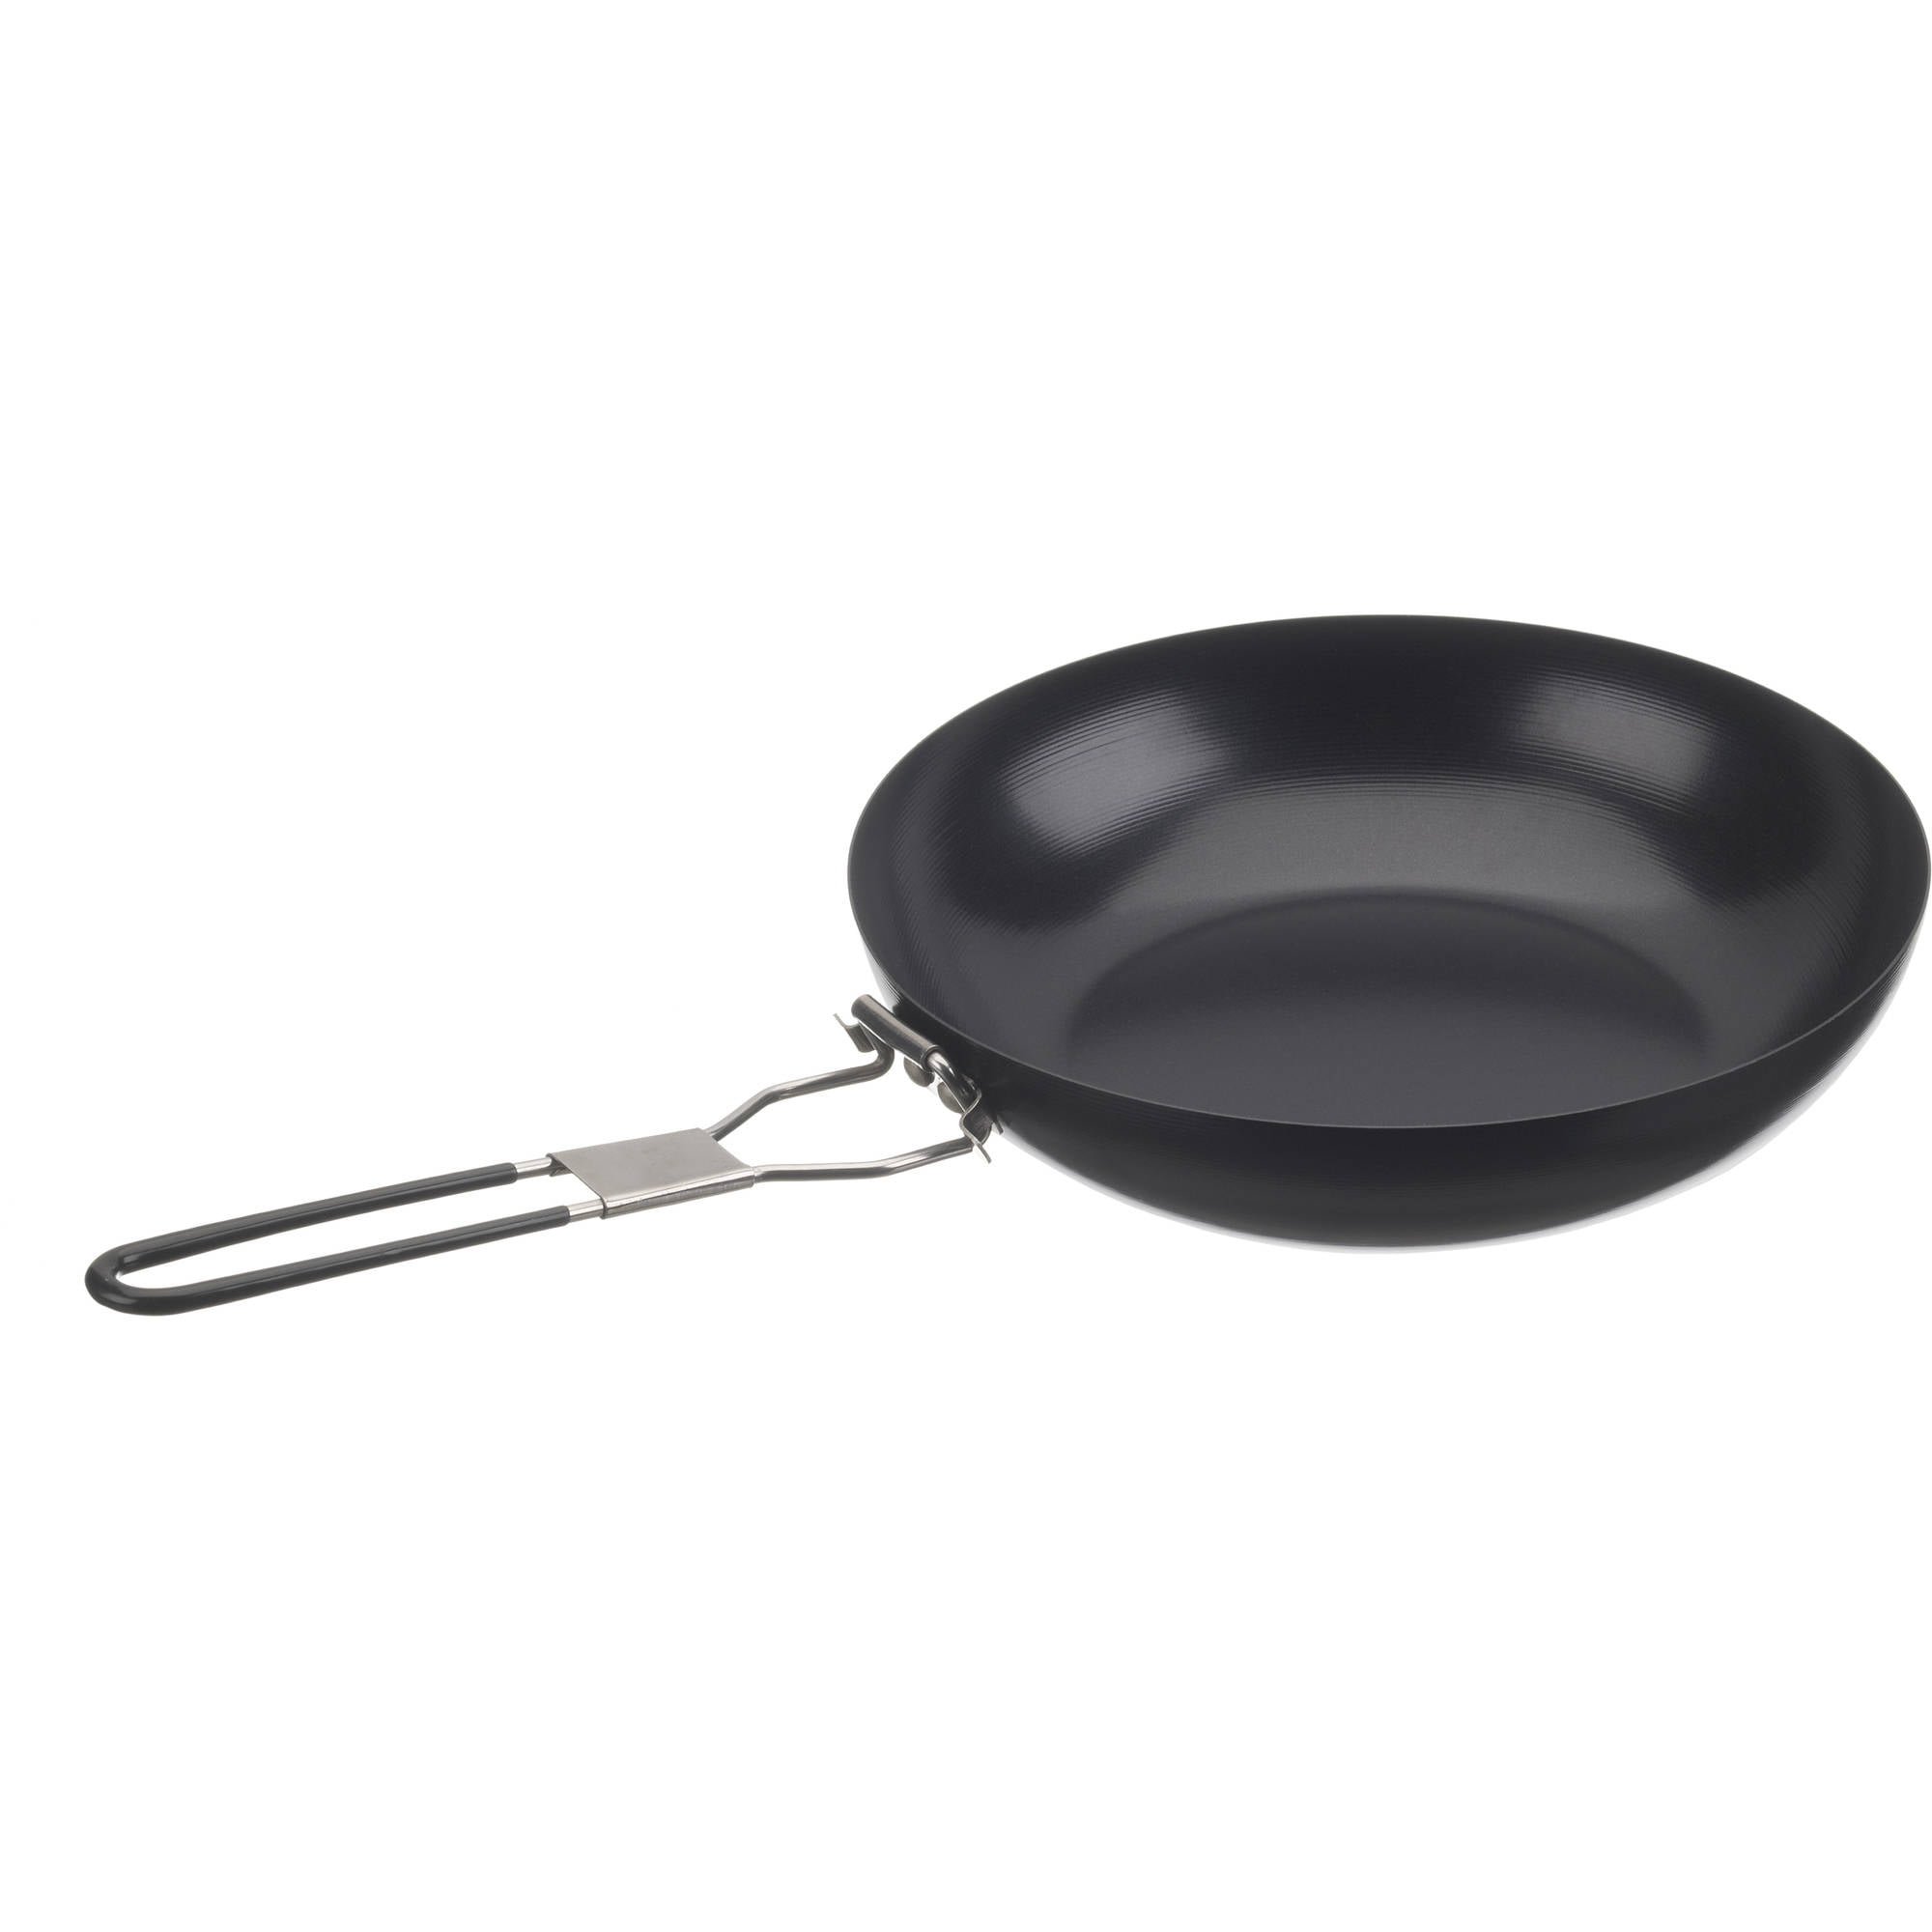 Titanium Non-Stick Frying Pan with Folding Handle Non-Stick Coating Cooking Pot for Outdoor Camping Picnic Backpacking, Size: 190 mm x 43 mm, Silver